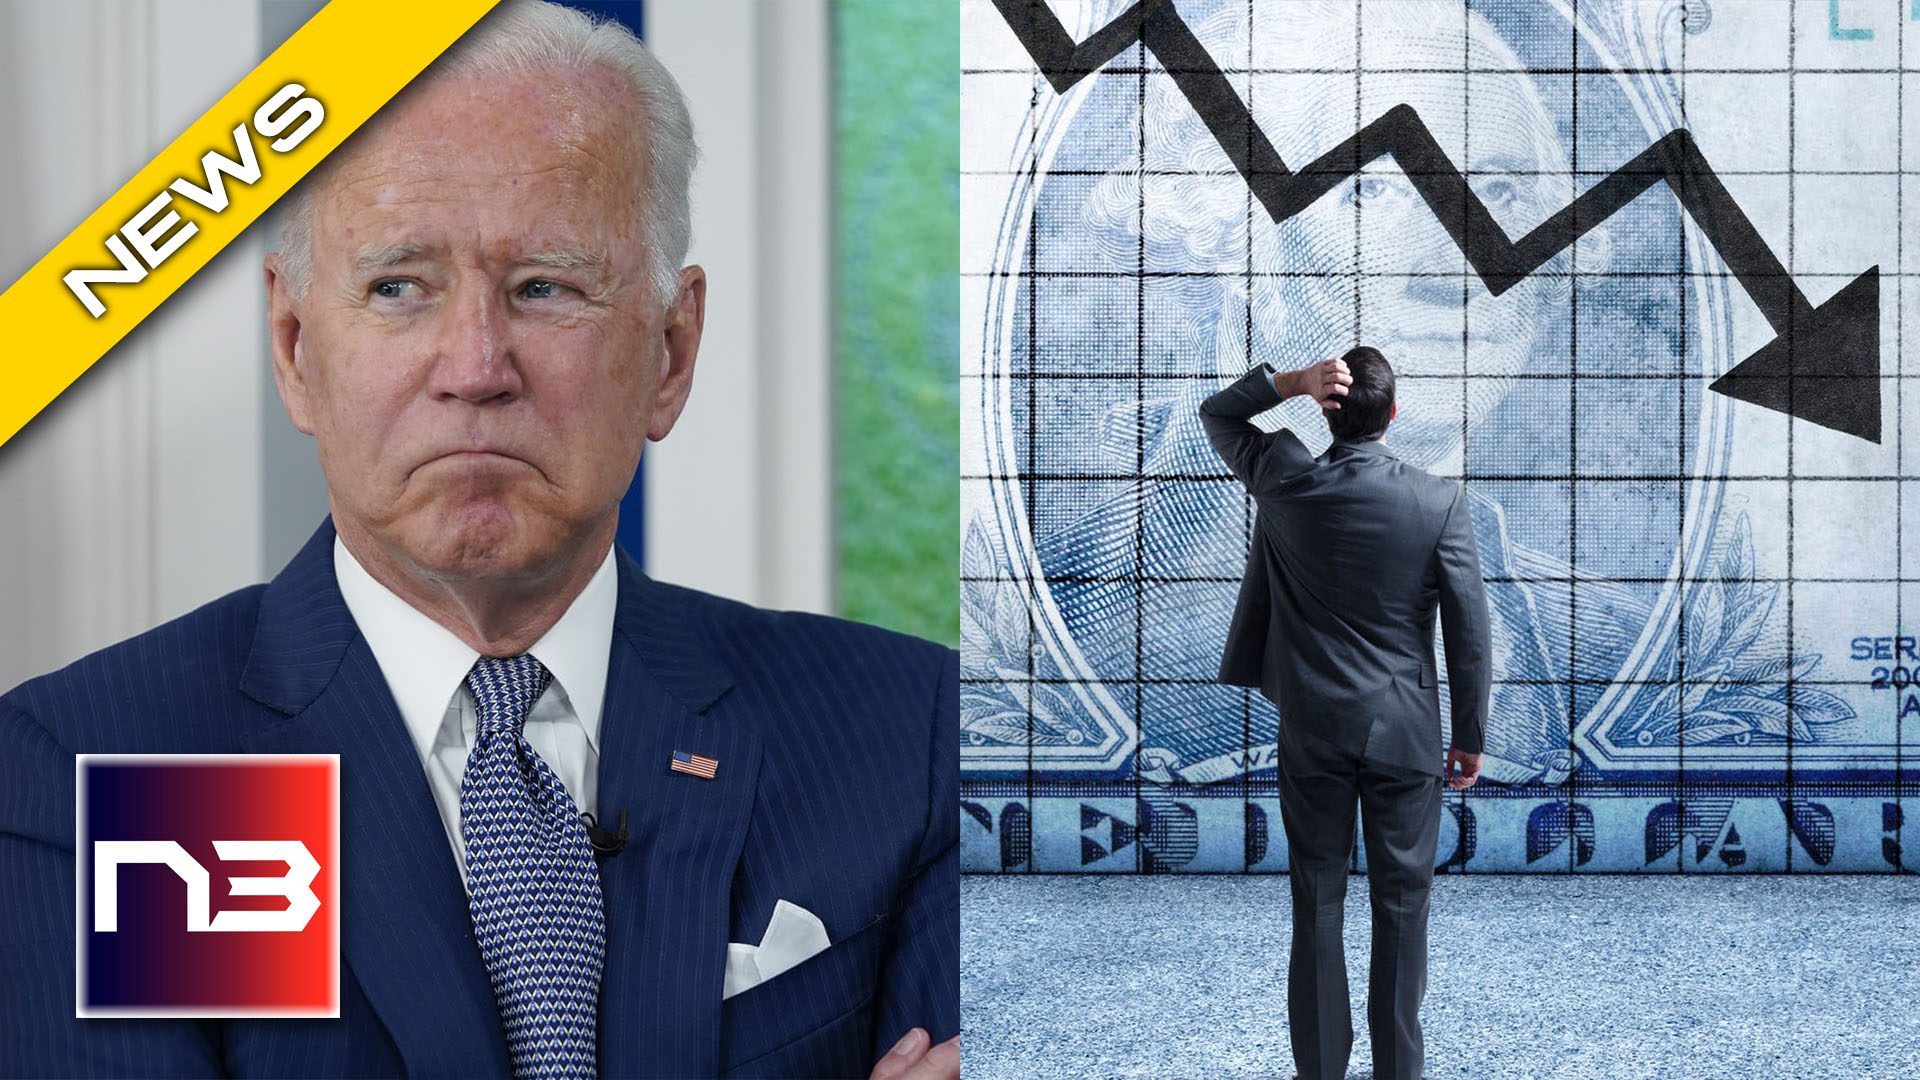 CONFIRMED: Economic Apocalypse ROCKING America And There is Only One Person To Blame